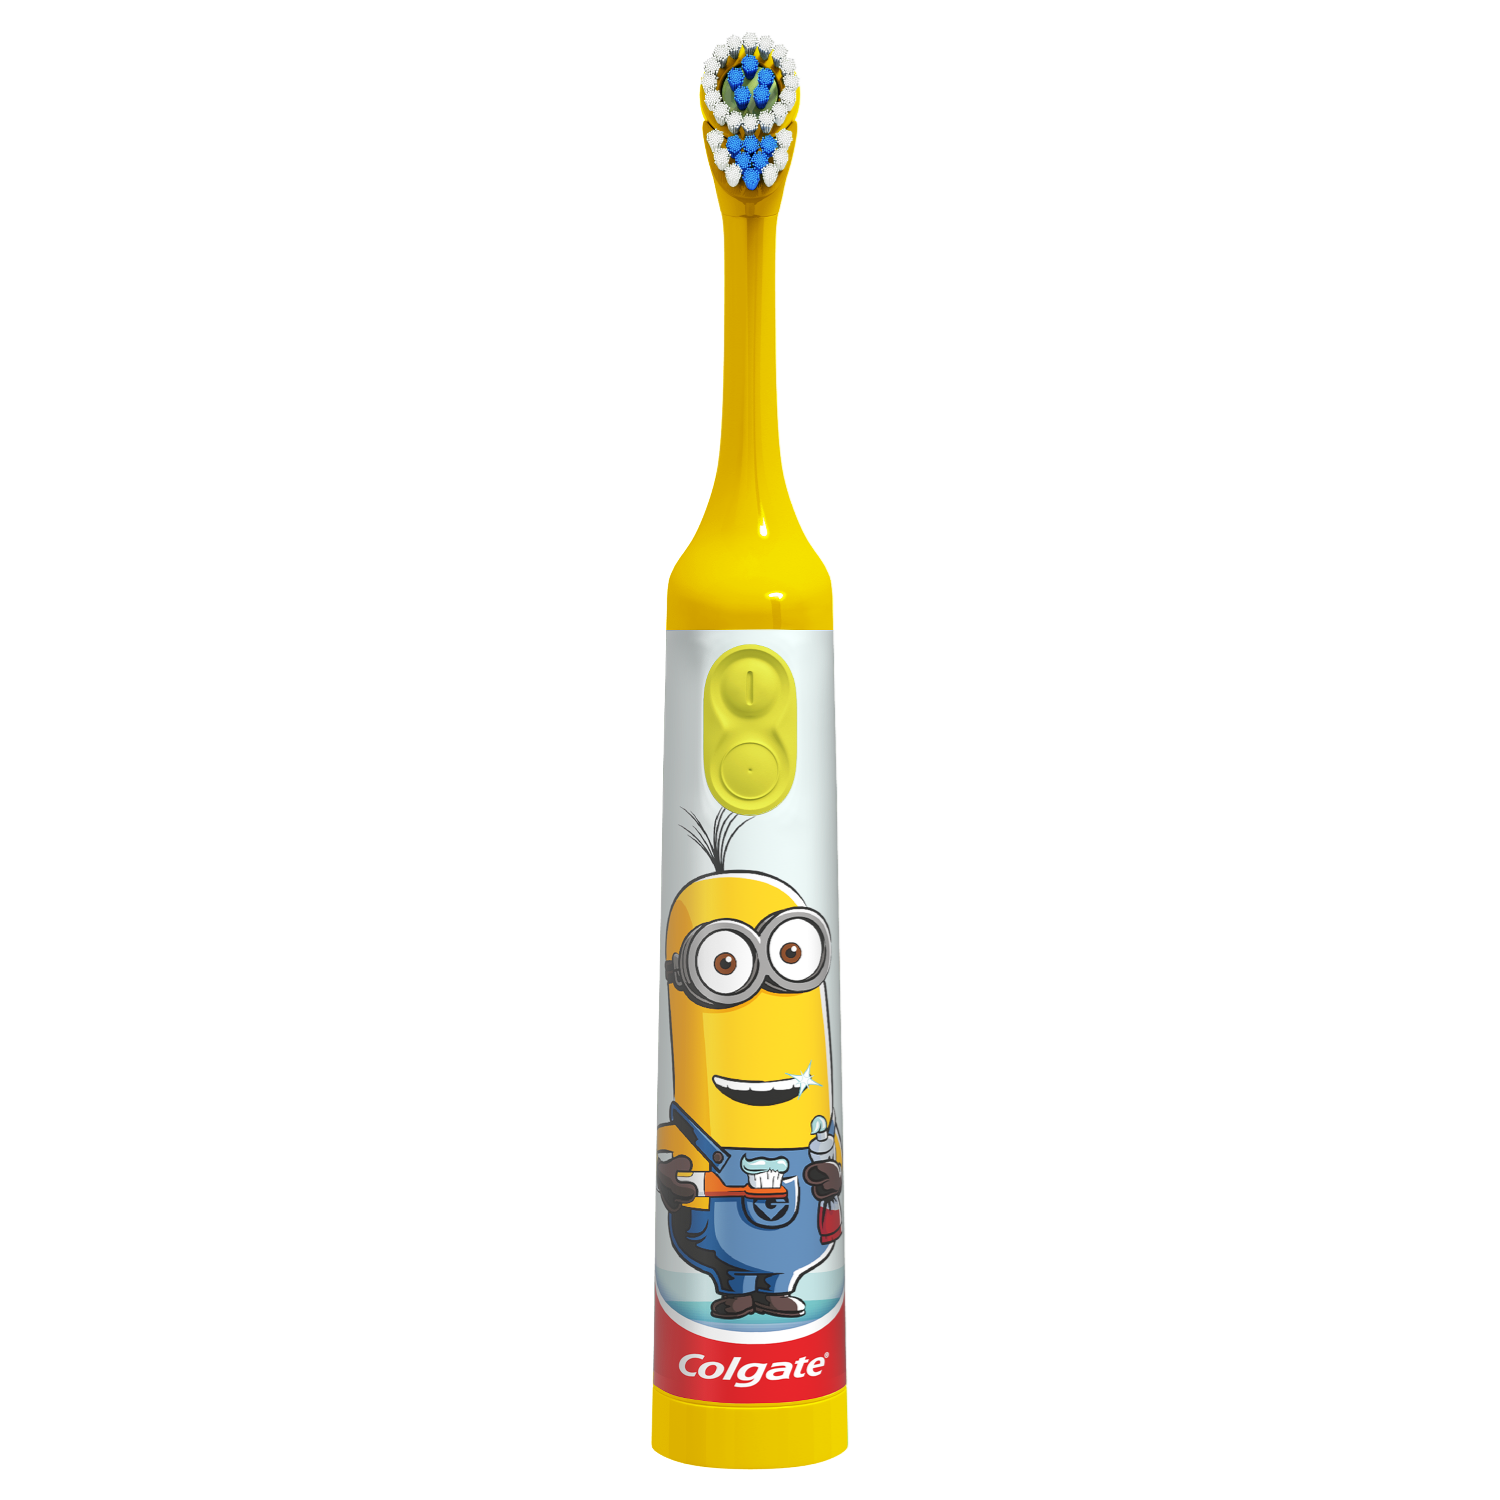 Colgate Kids Minions Battery Electric Toothbrush - image 4 of 5